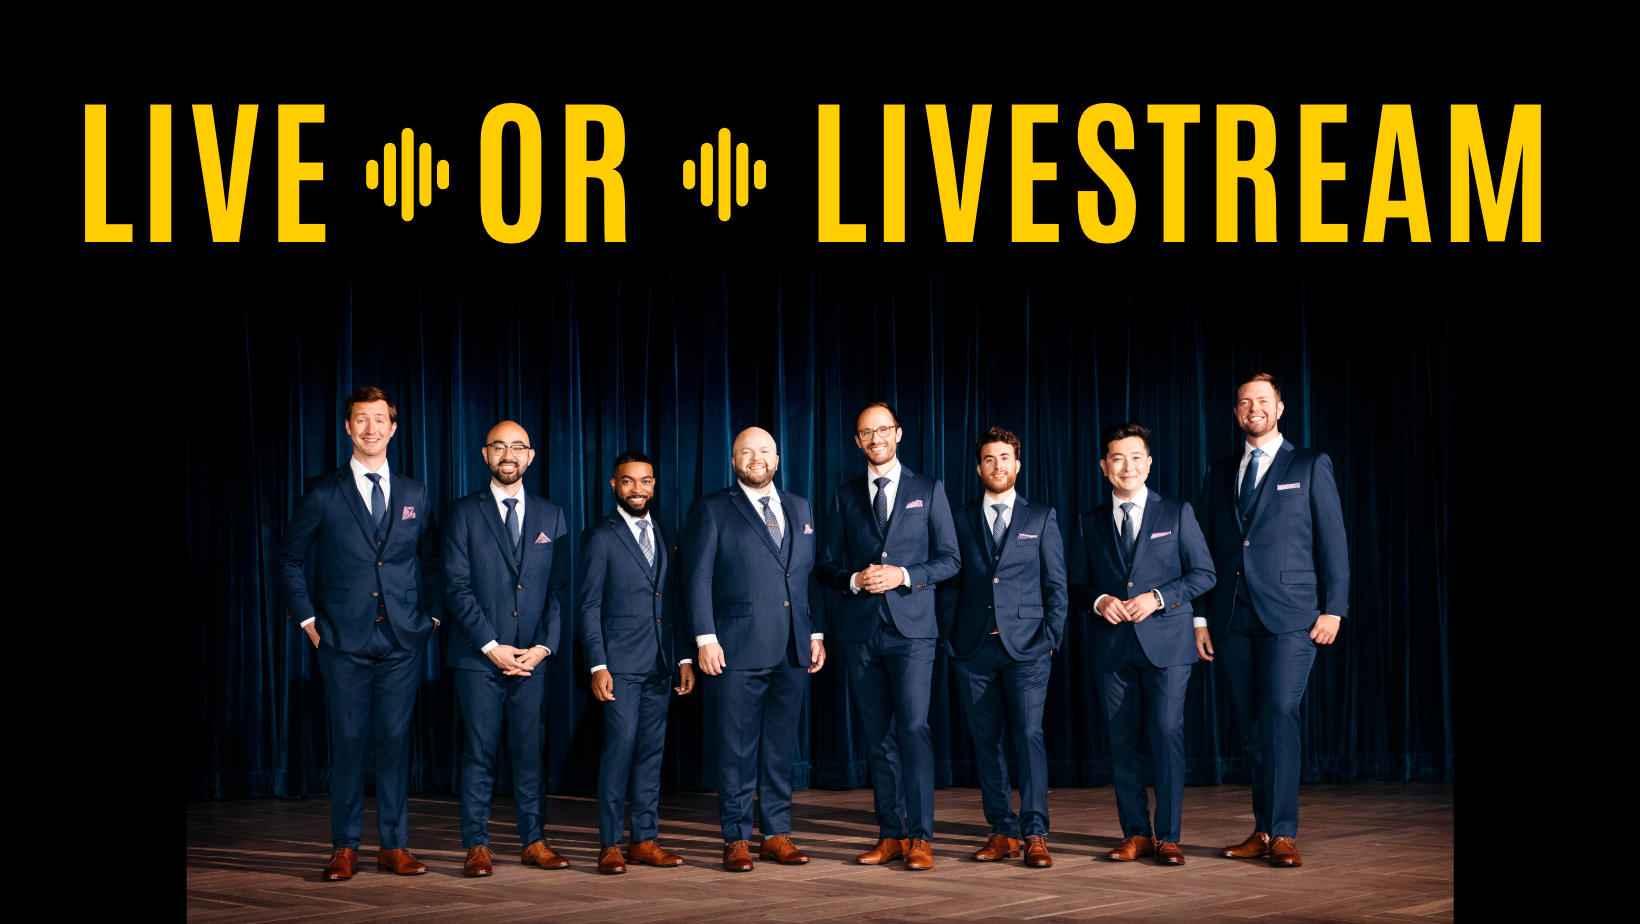 Text "Live or Livestream" with image of Cantus vocal group on a black background